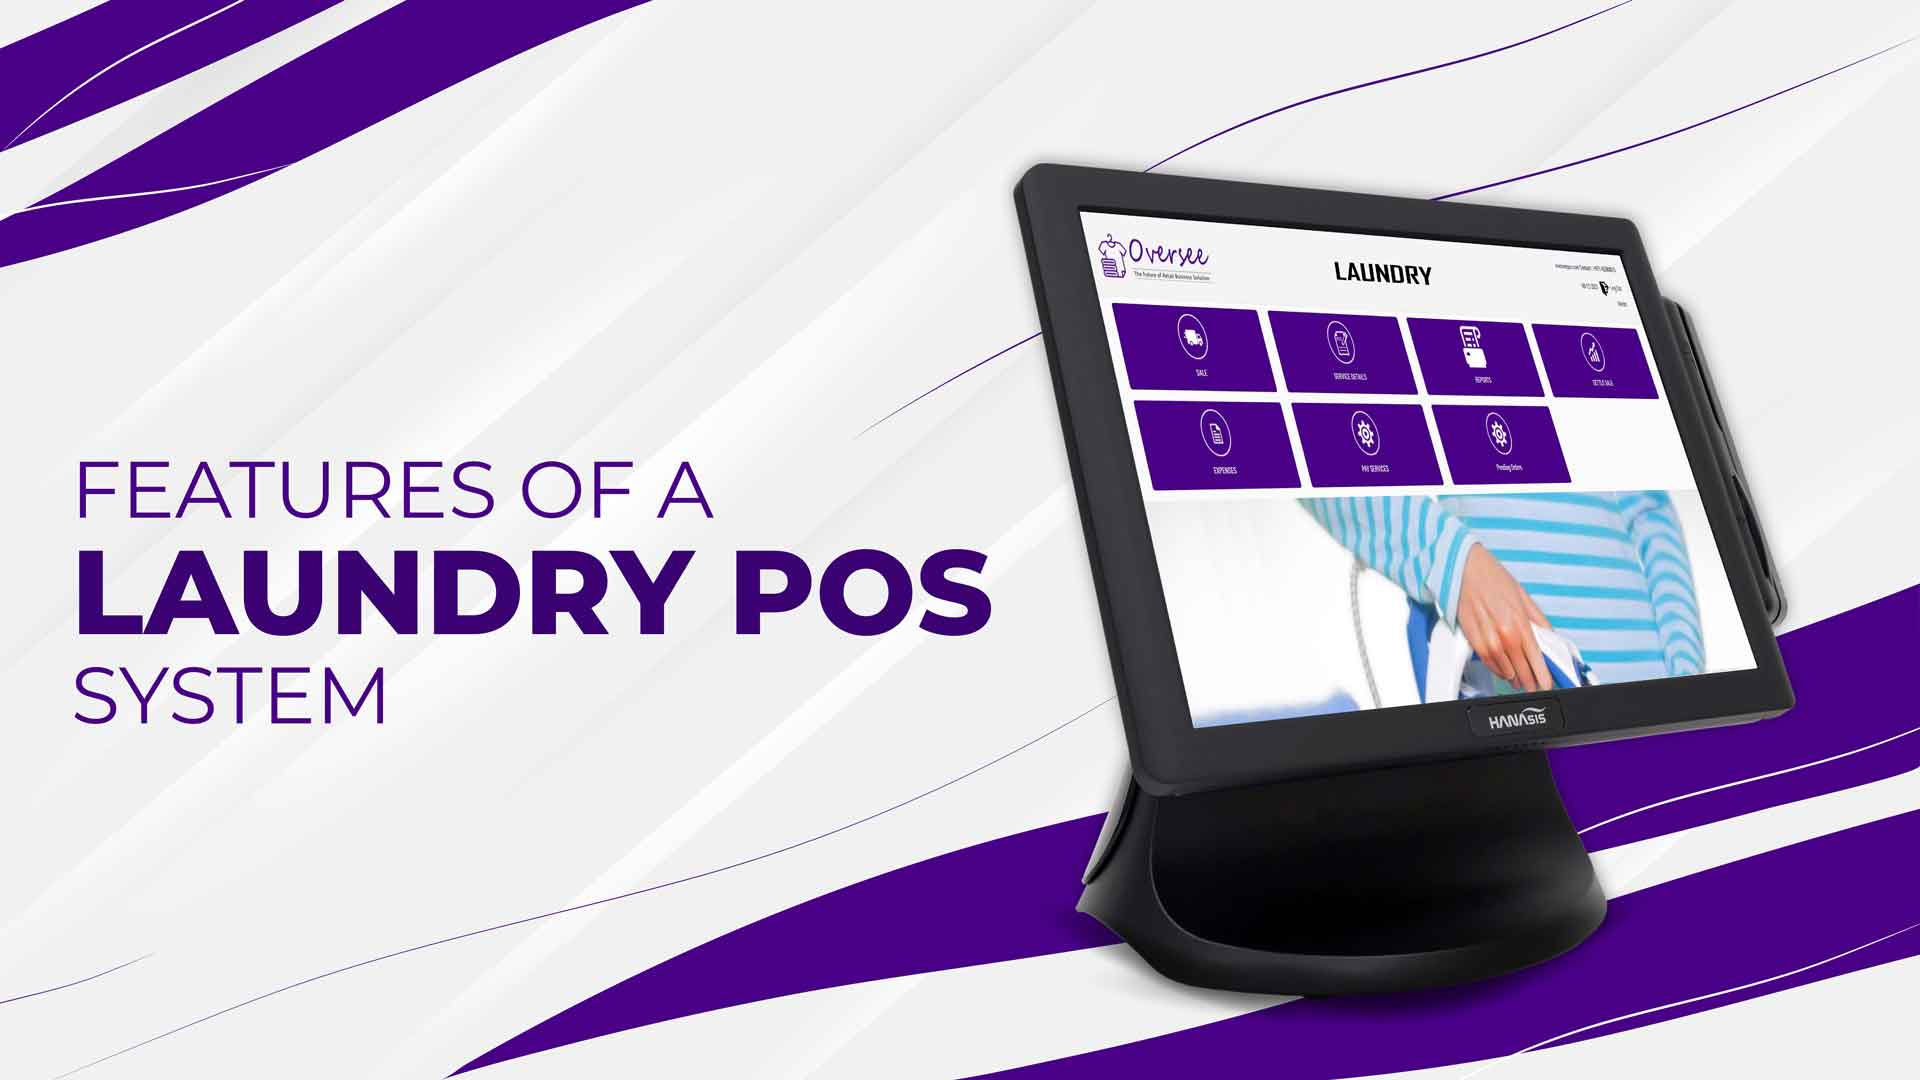 Features of a Laundry POS system